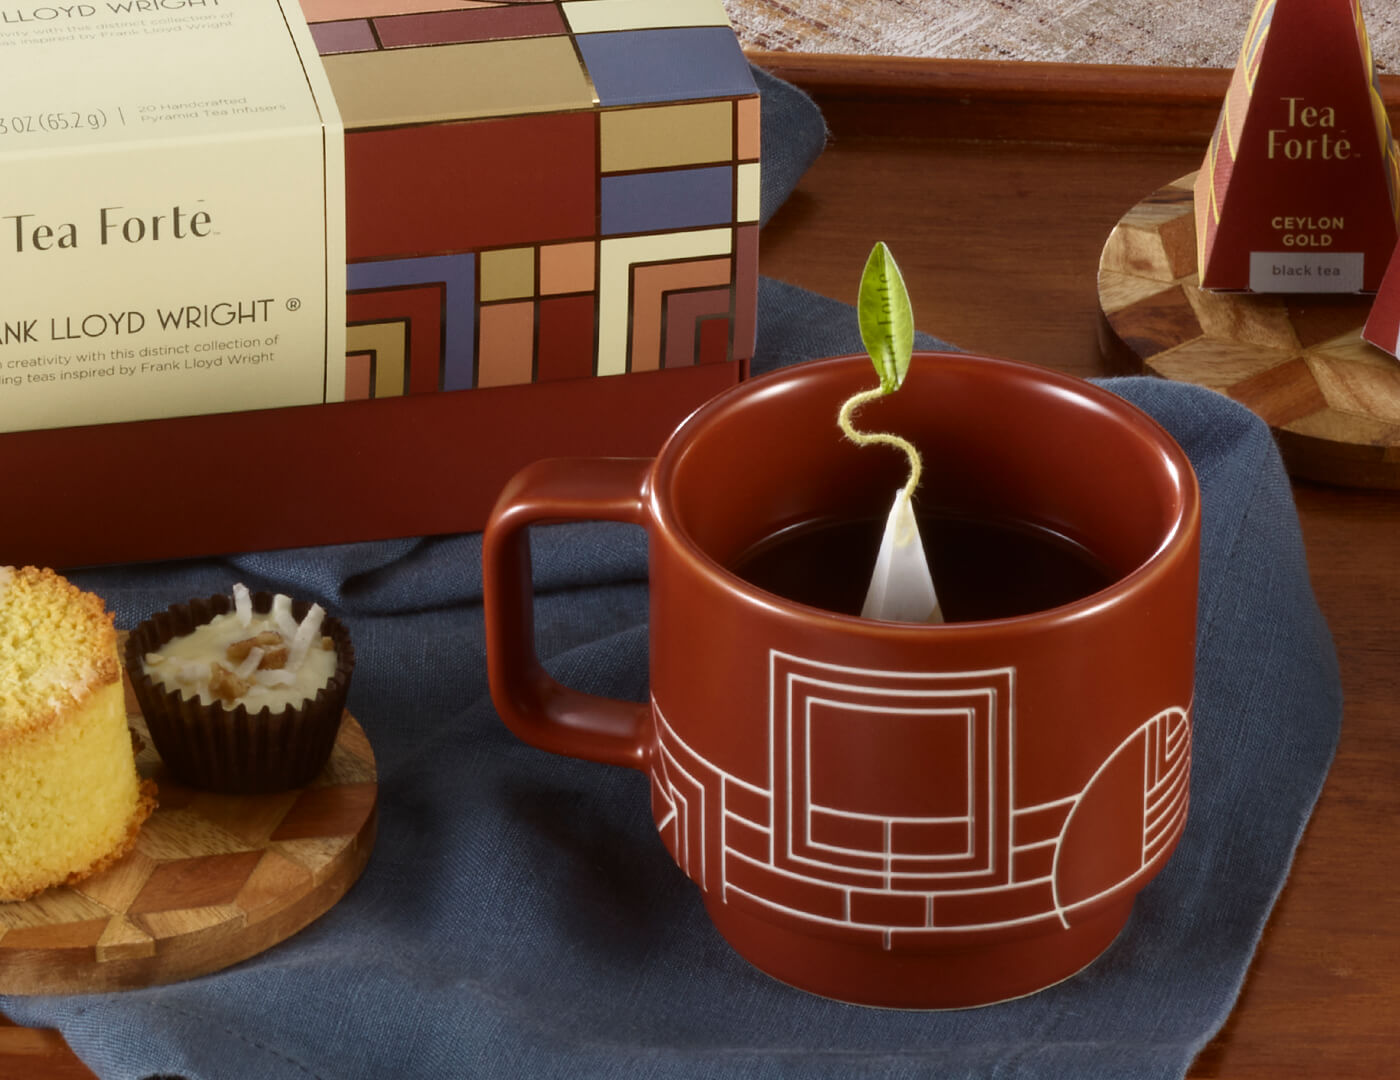 Frank Lloyd Wright teacup with infuser in Terra brown on wooden table with dessert and Presentation Box